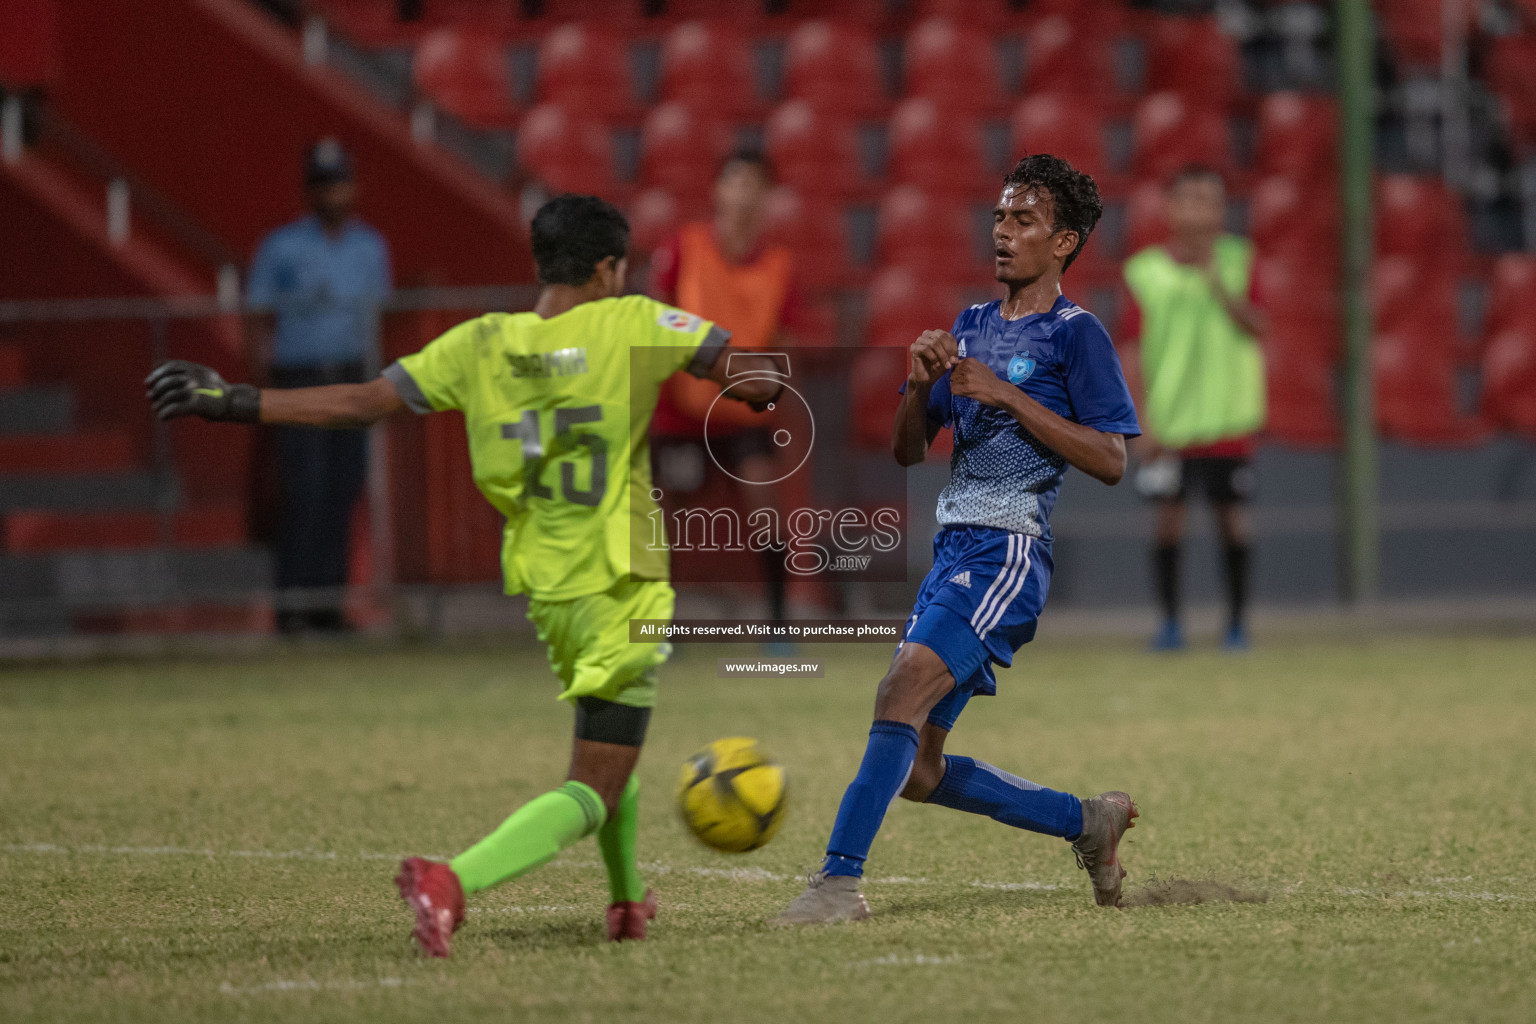 Villa International High School and Center for Higher Secondary Education in the finals of MAMEN Inter School Football Tournament 2019 (U18) in Male, Maldives on 8th April 2019